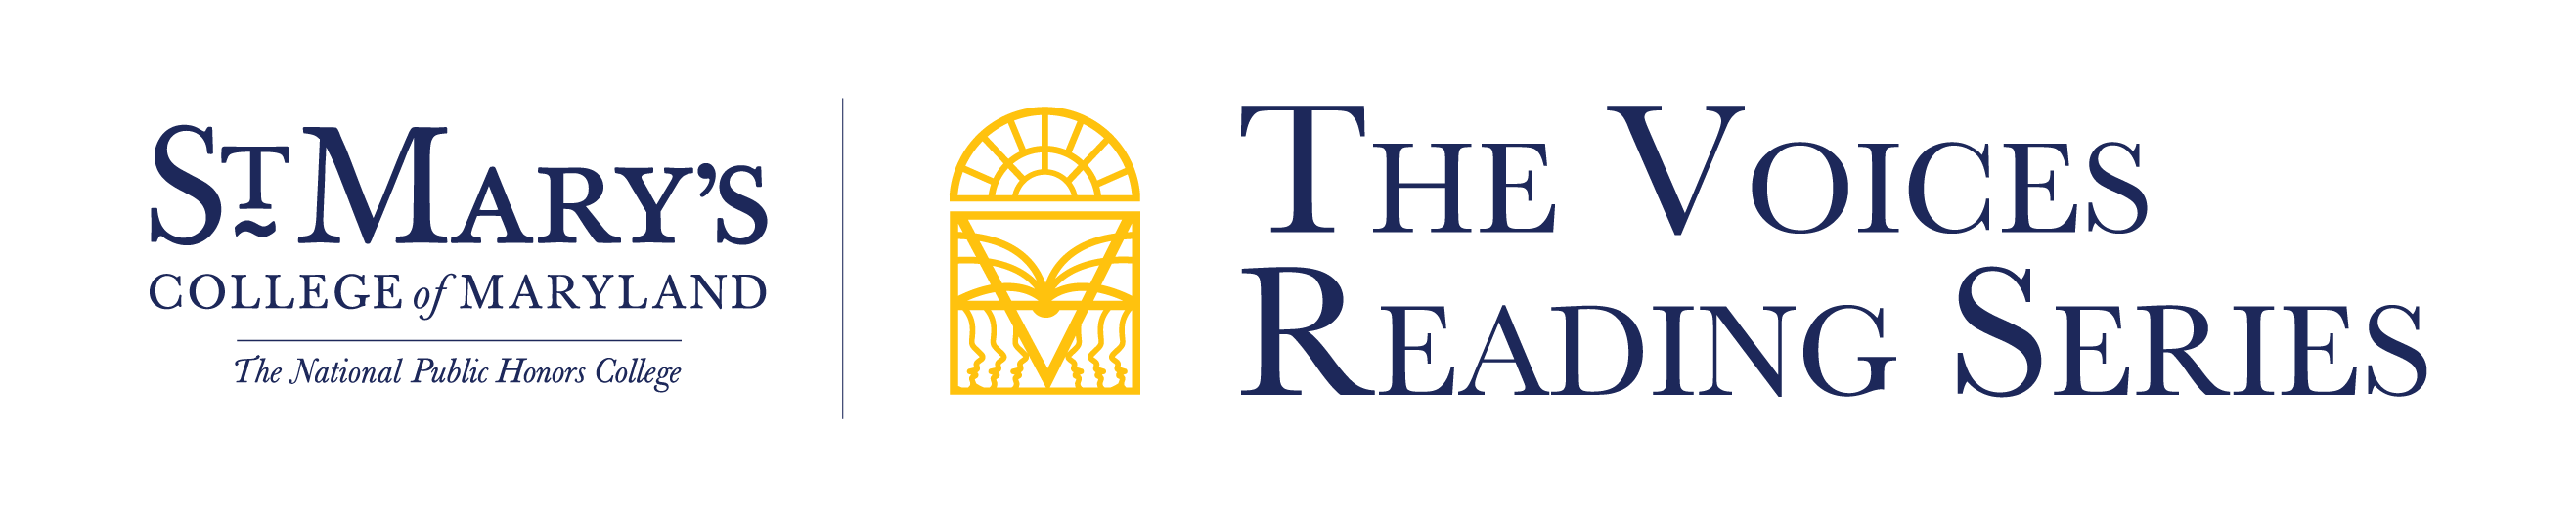 St. Mary's College of Maryland, The National Public Honors College, The Voices Reading Series, logo